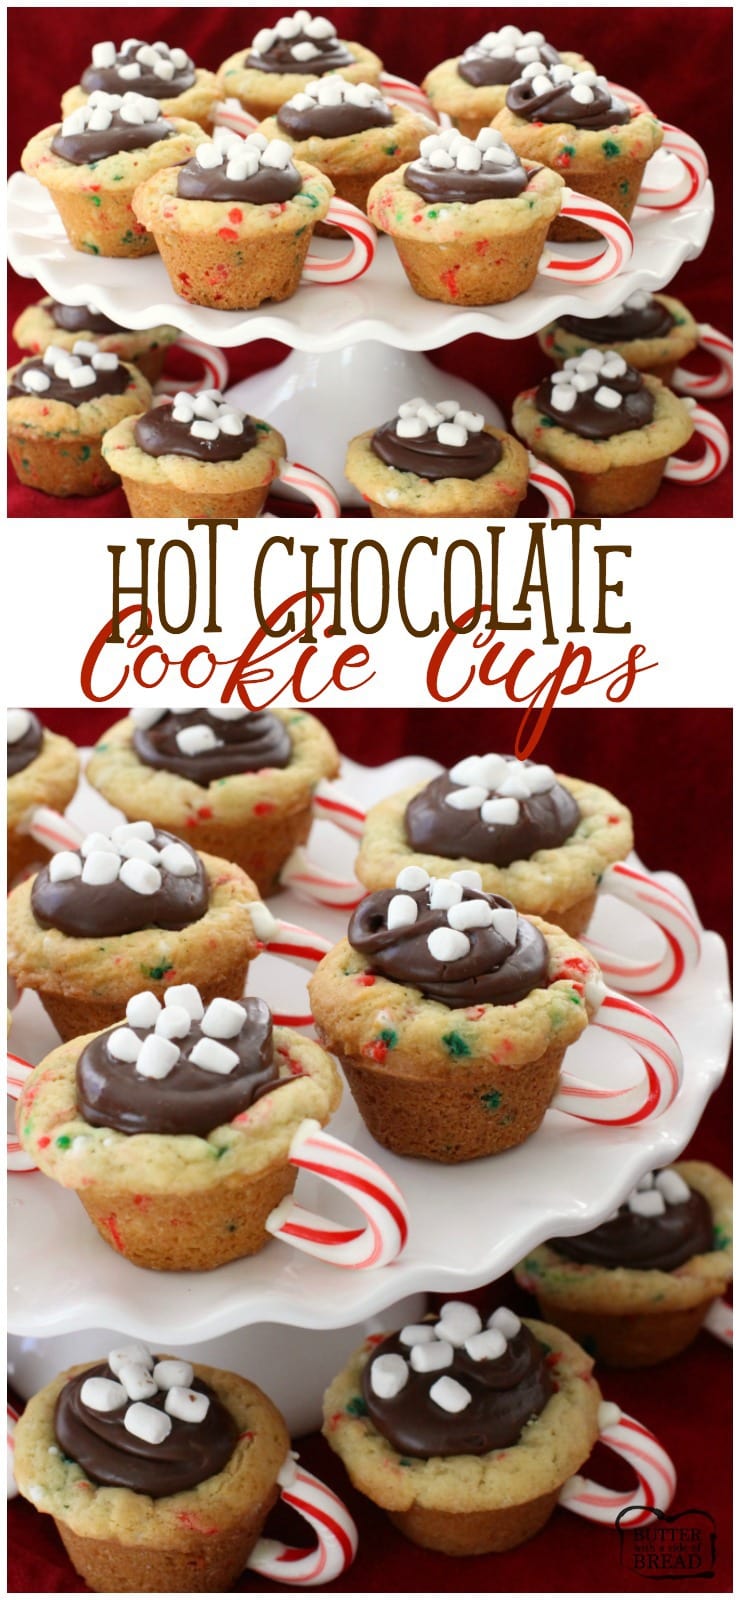 Hot Chocolate Cookie Cups are festive Christmas cookies! Sugar cookie cups filled with fudge, mini marshmallows & sprinkles. Love the candy cane handle! Best #Christmas #cookies from Butter With A Side of Bread